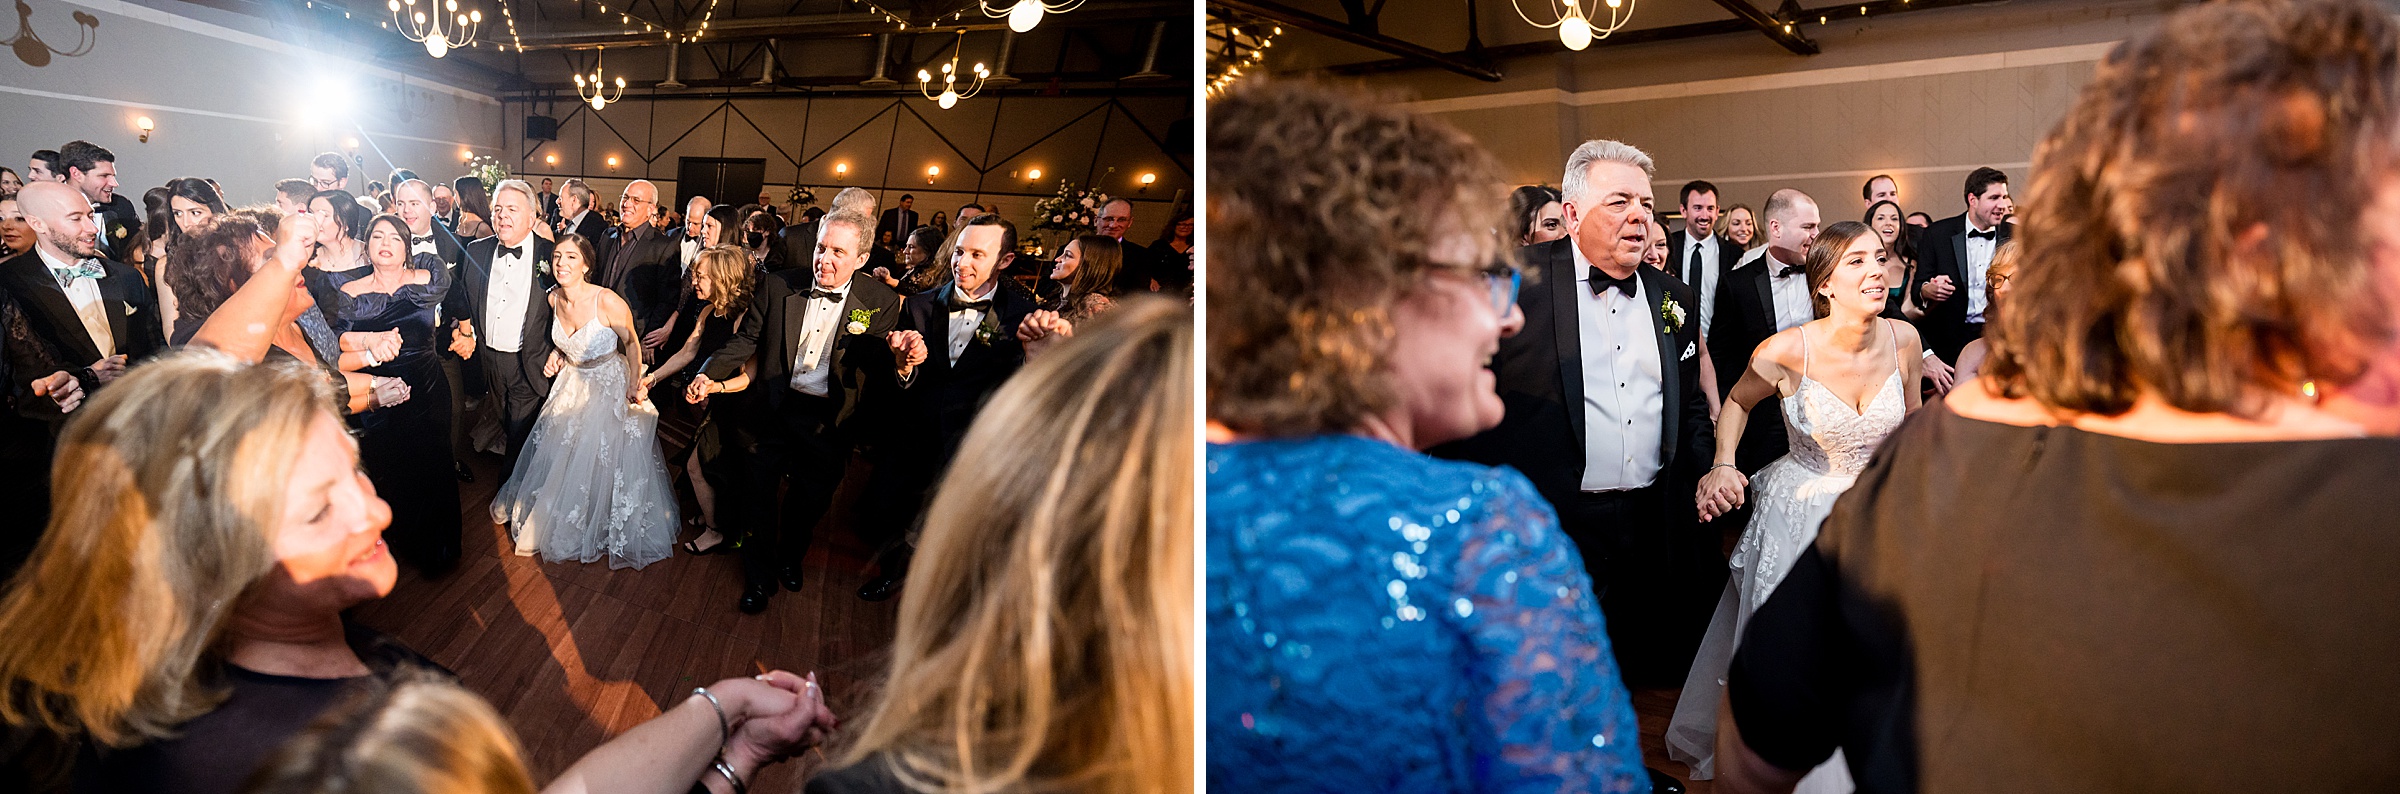 At a Lilah Events wedding, the bride and groom enjoy a dance at their reception.